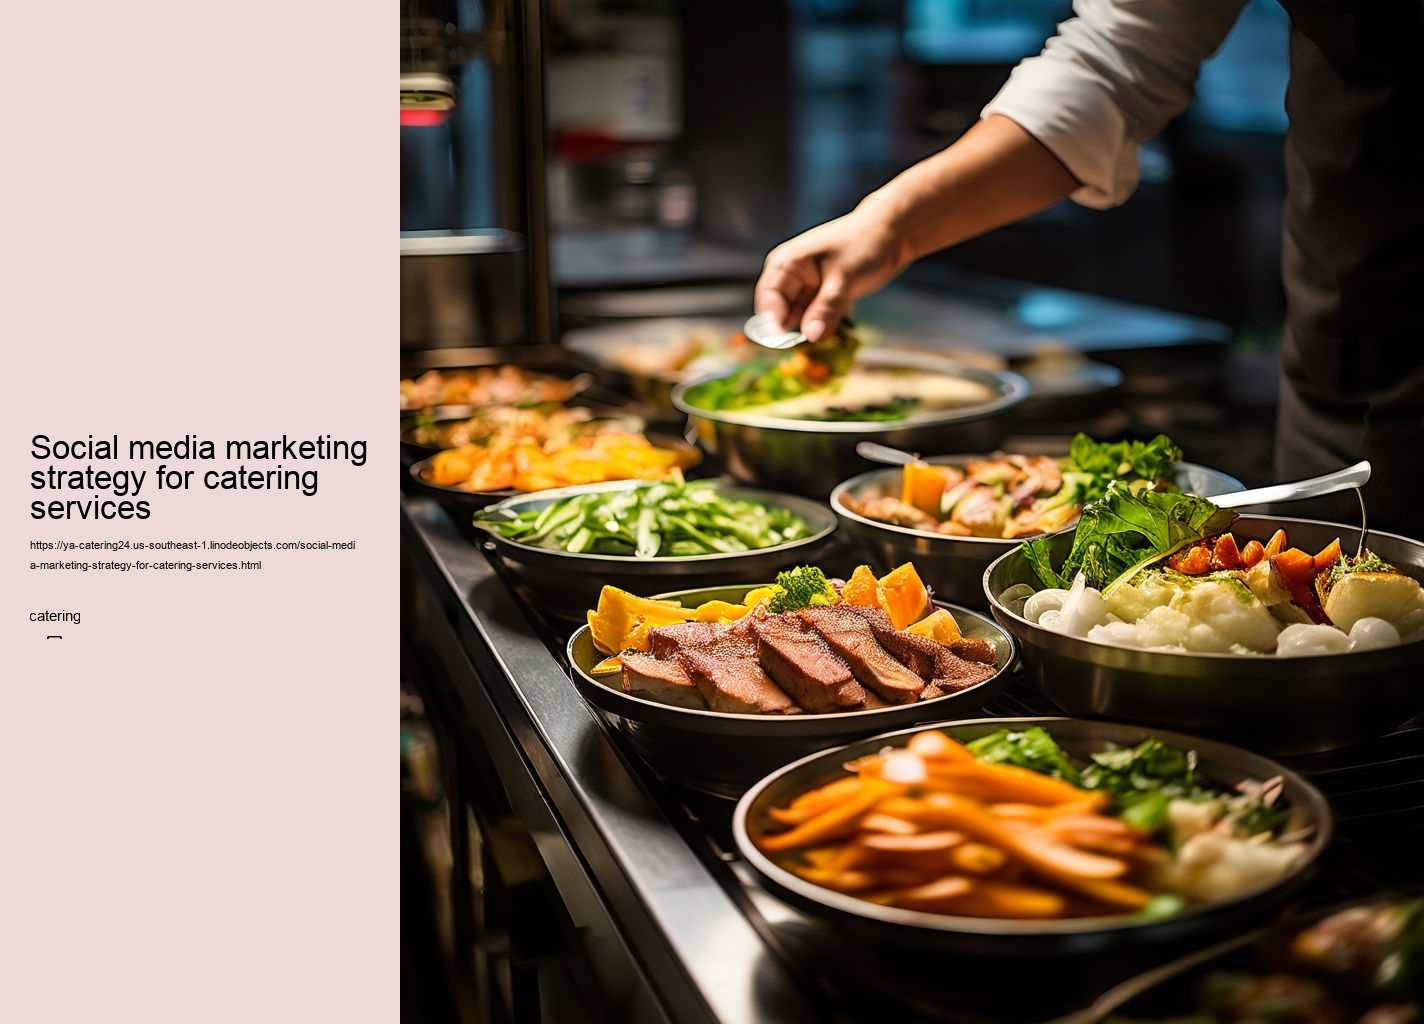 Social media marketing strategy for catering services